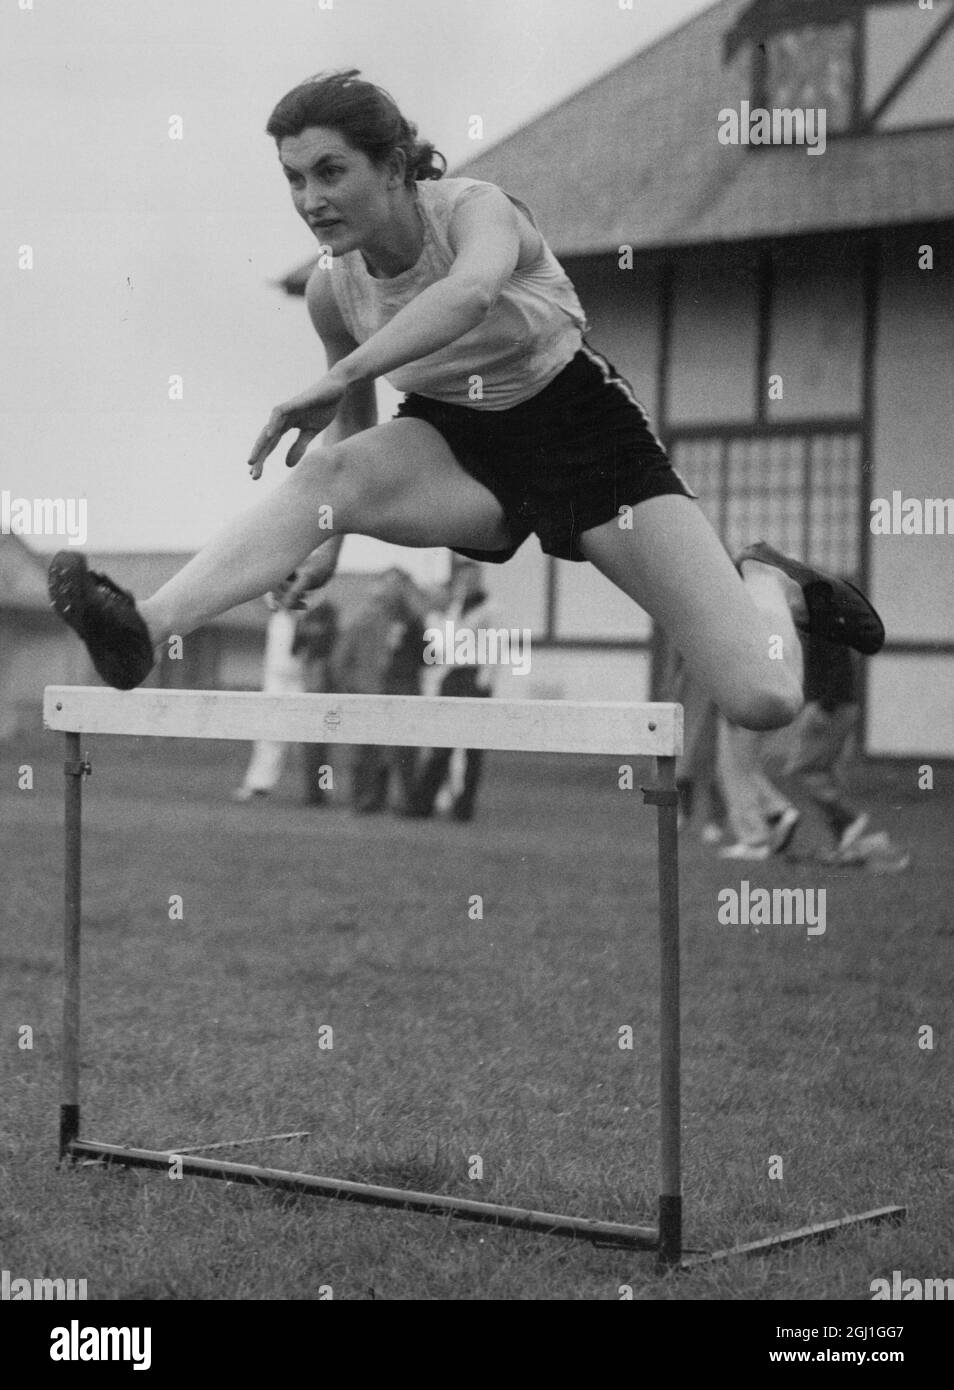 Jean Desforges - Essex hurdler and long jump - competed in 1952 Olympics - 17 April 1948 Stock Photo